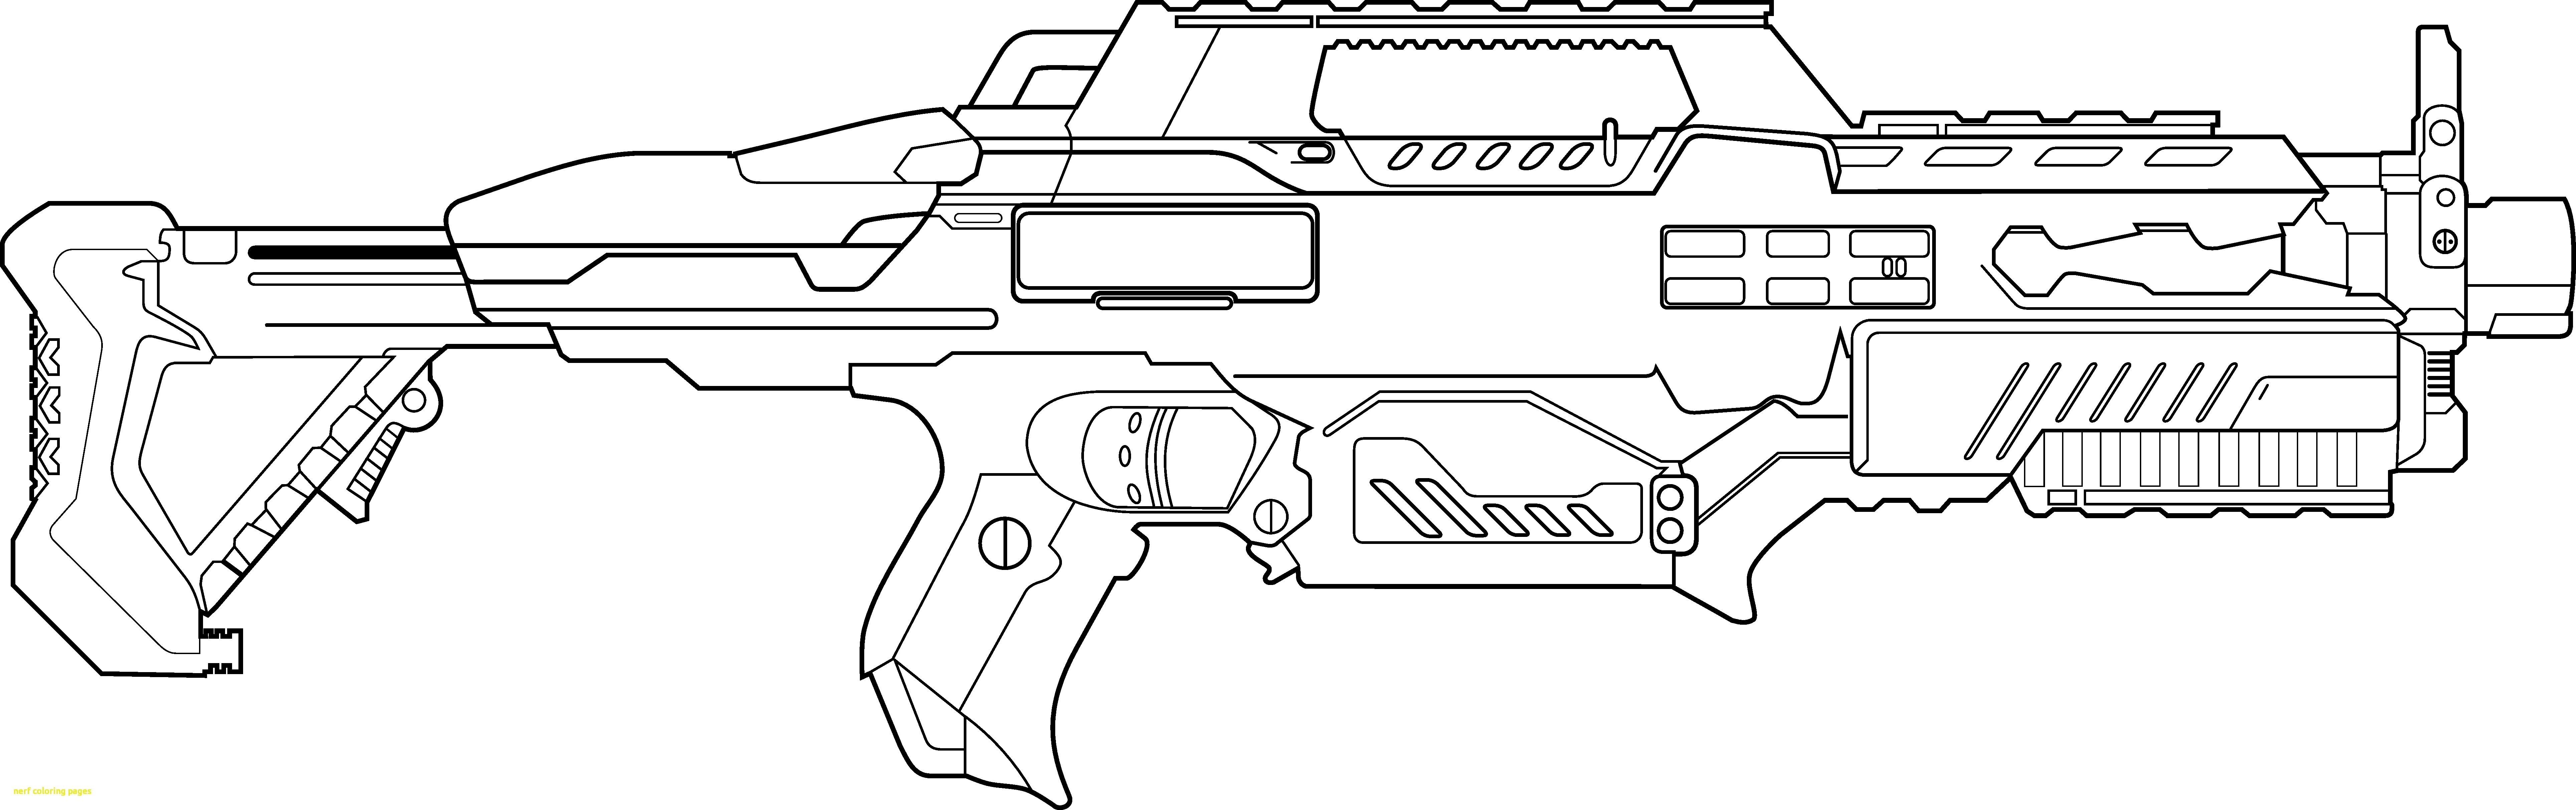 Gun Coloring Pages Fantastic Nerf Gun Coloring Pages Best R4ds Co Fresh Free Printable